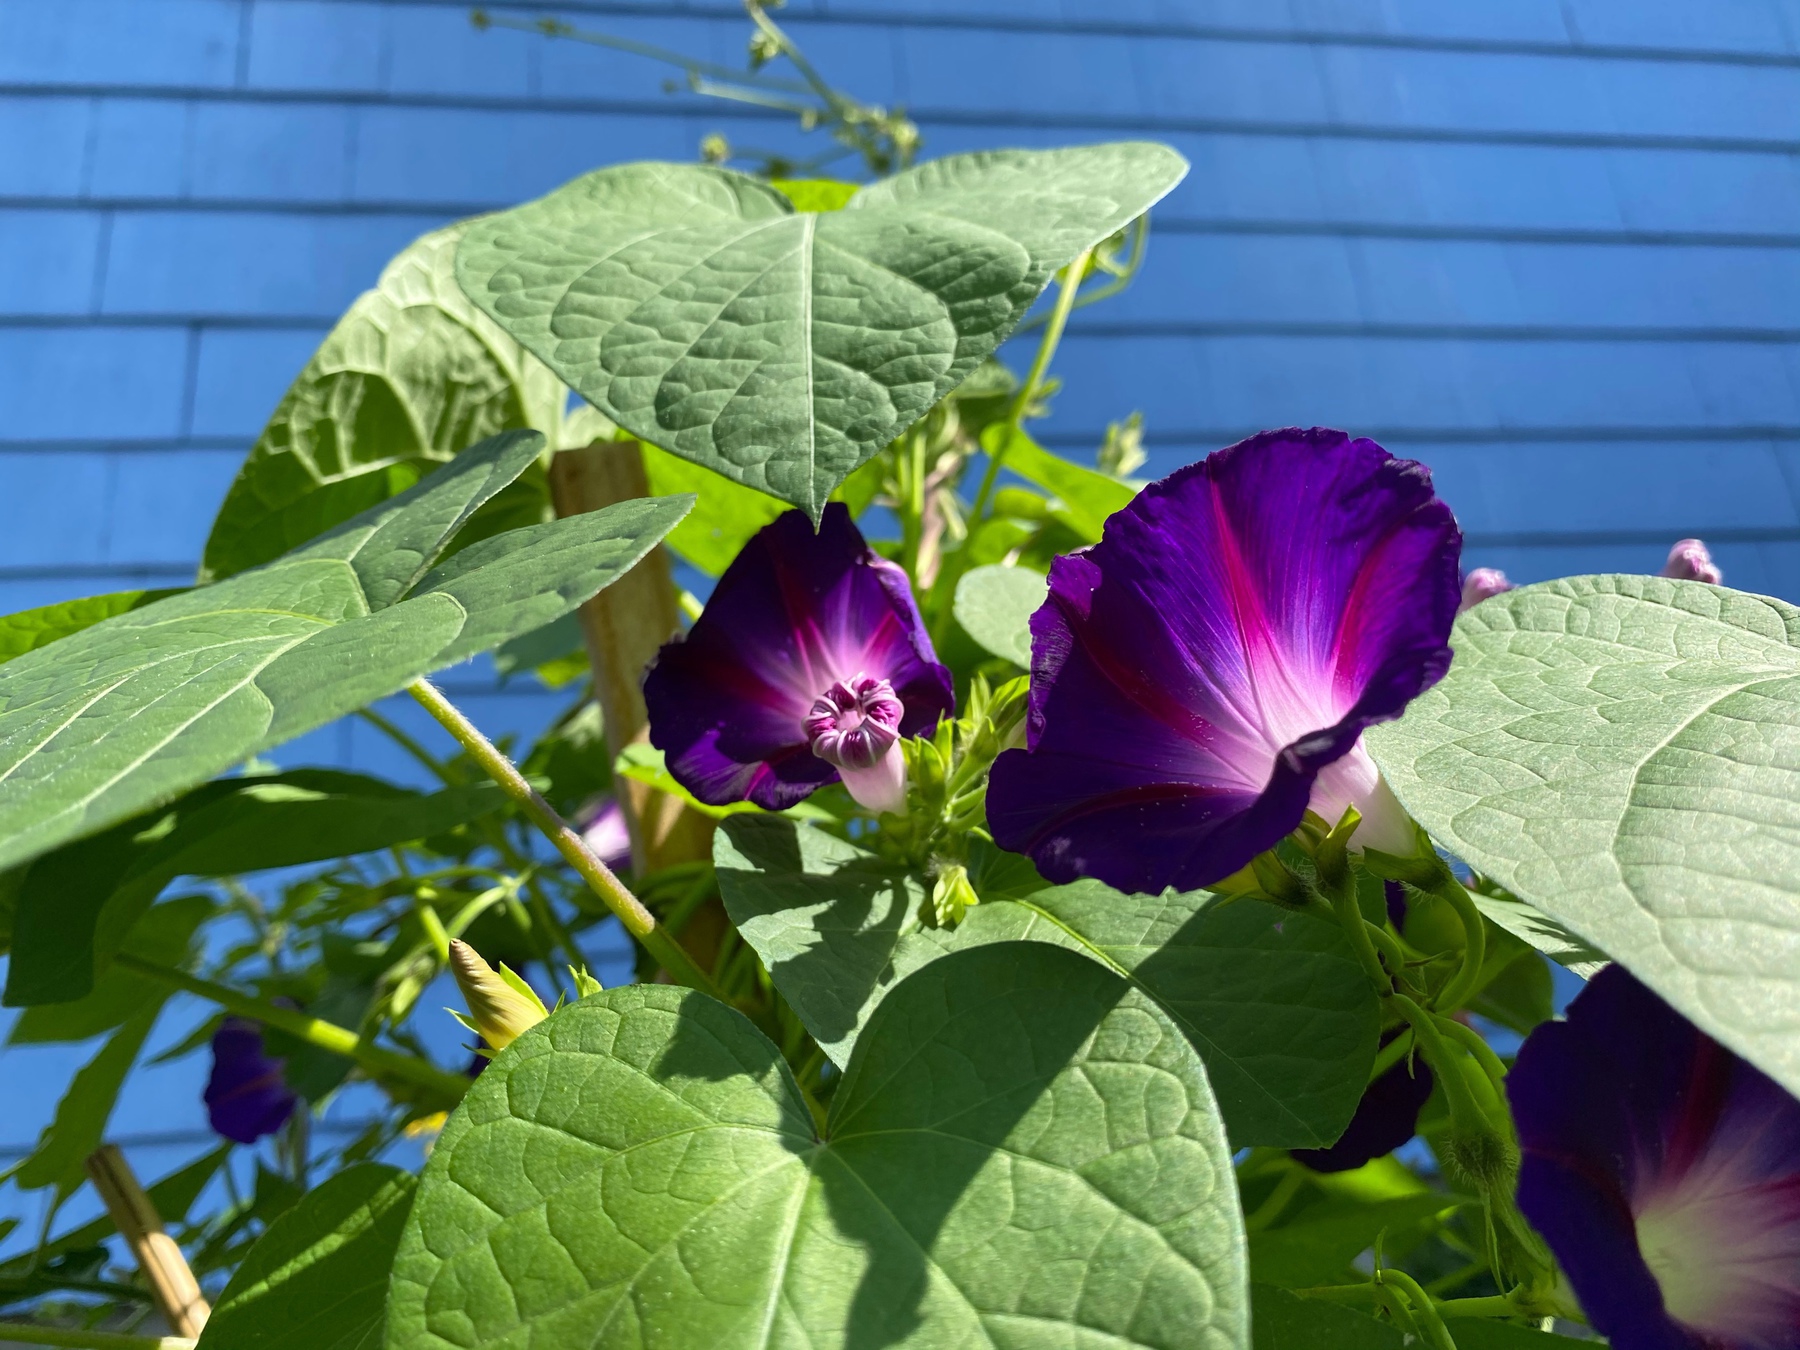 Close up of purple morning glories with a blue shingled wall behind.